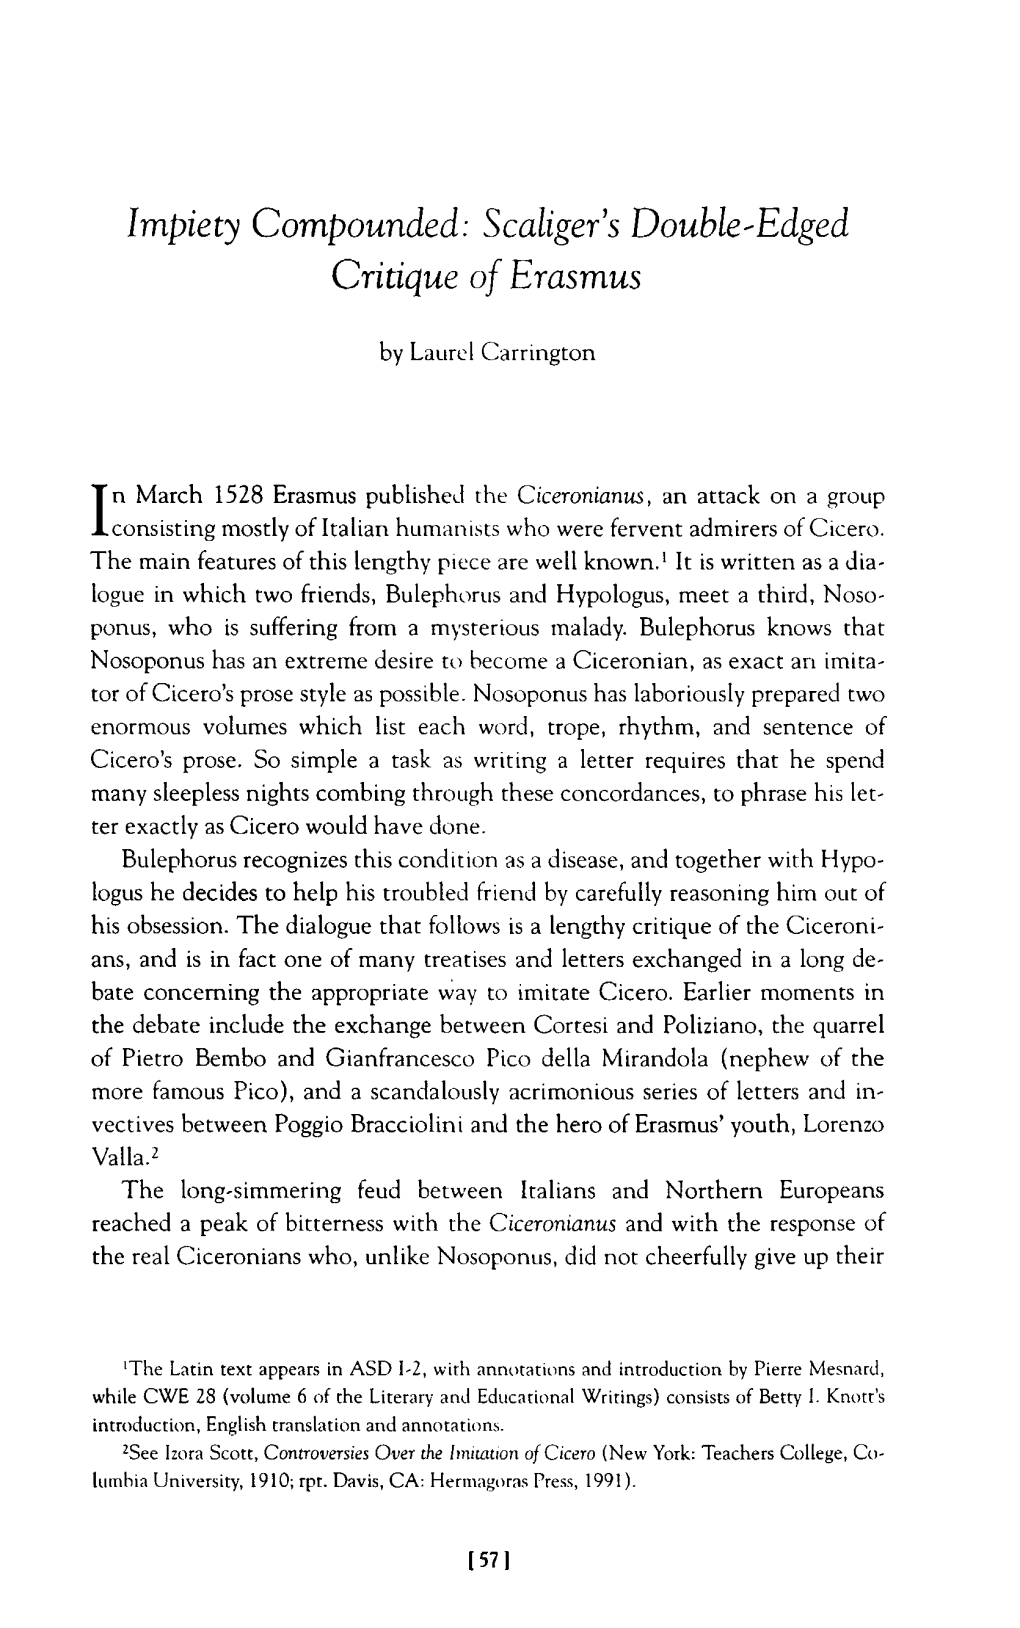 Scaliger's Double-Edged Critique of Erasmus by Laurel Carrington in March 1528 Erasmus Published